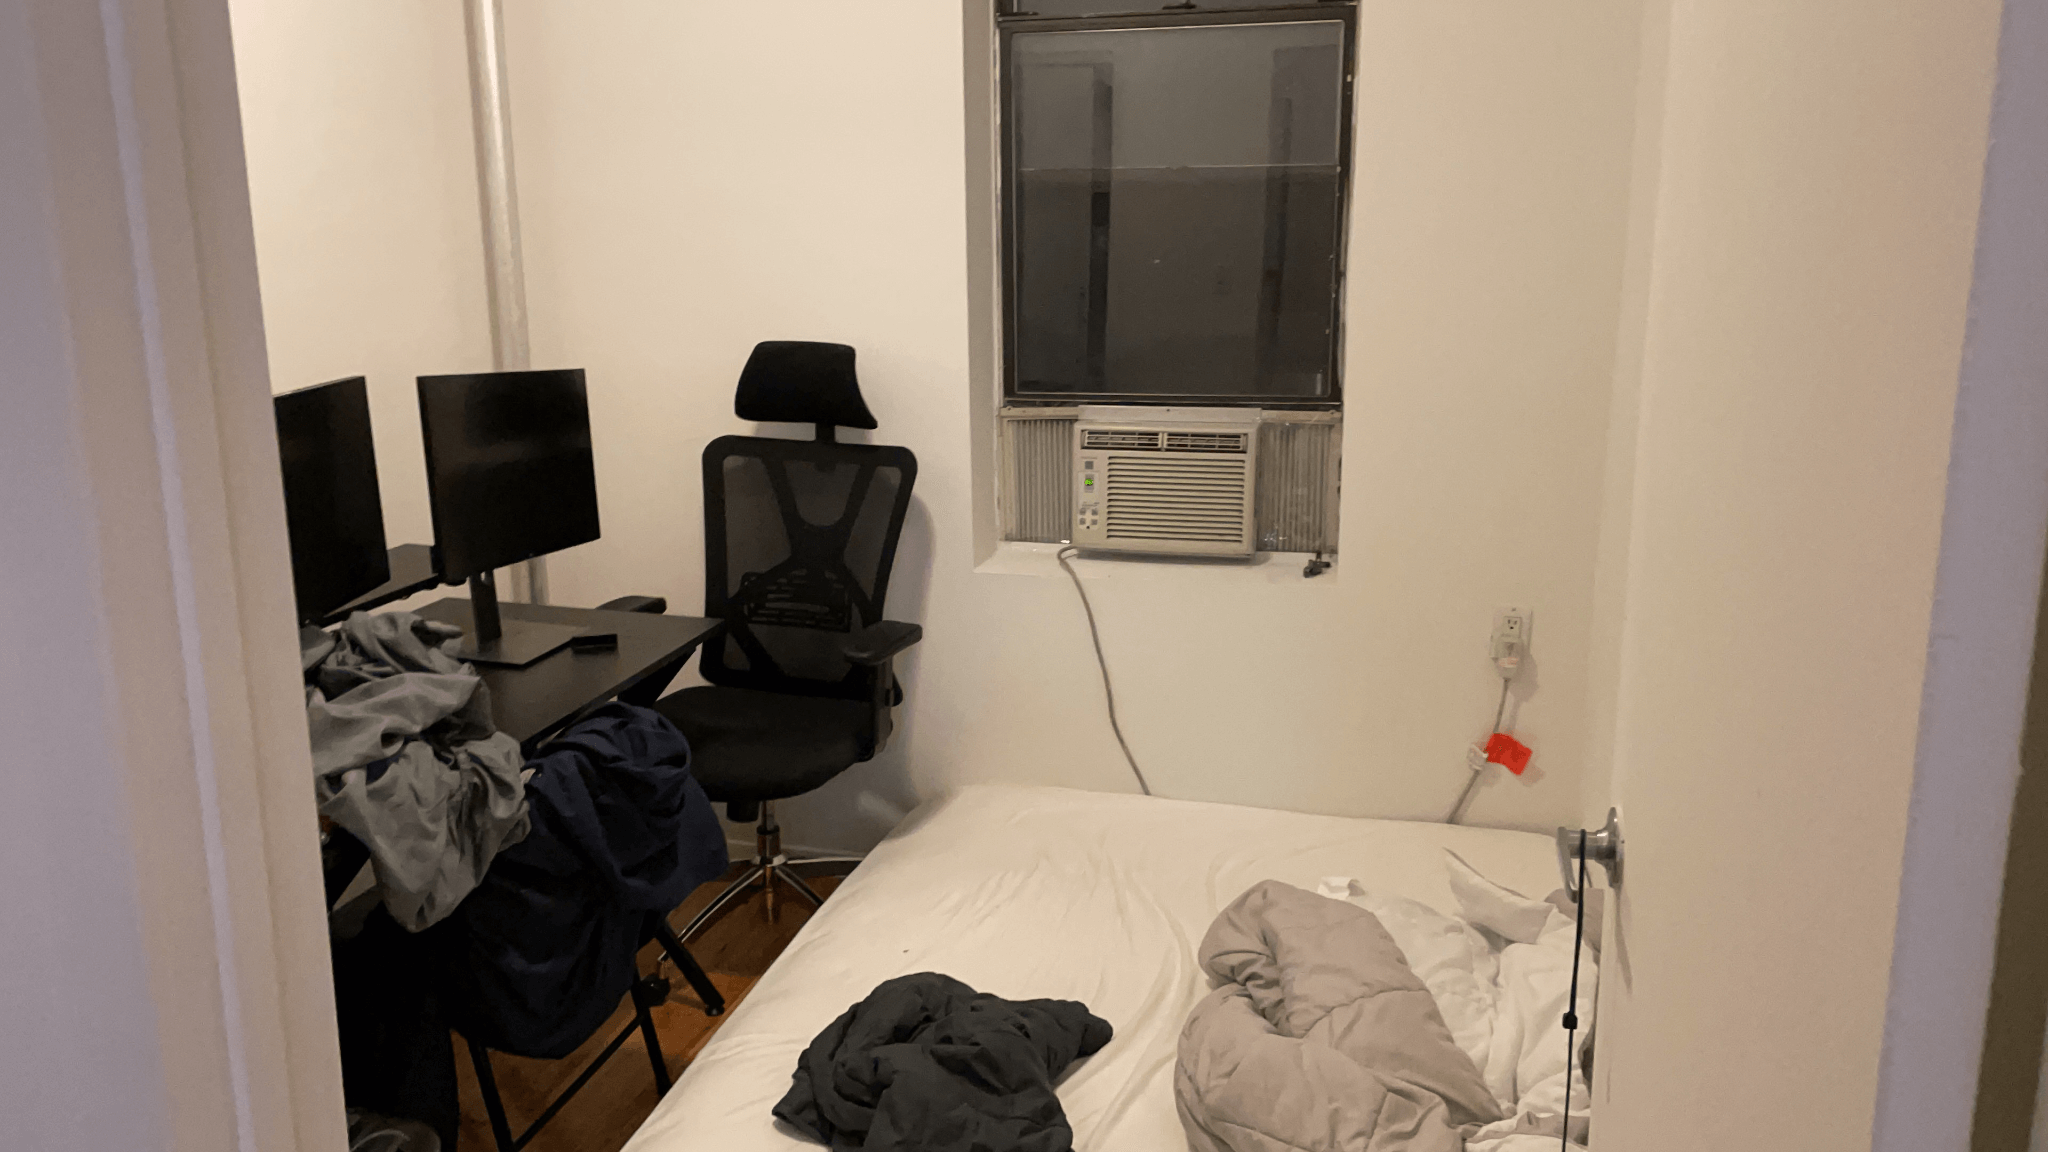 The hot Manhattan housing market left me with a room that fit only a desk and bed, leaving no room for me.